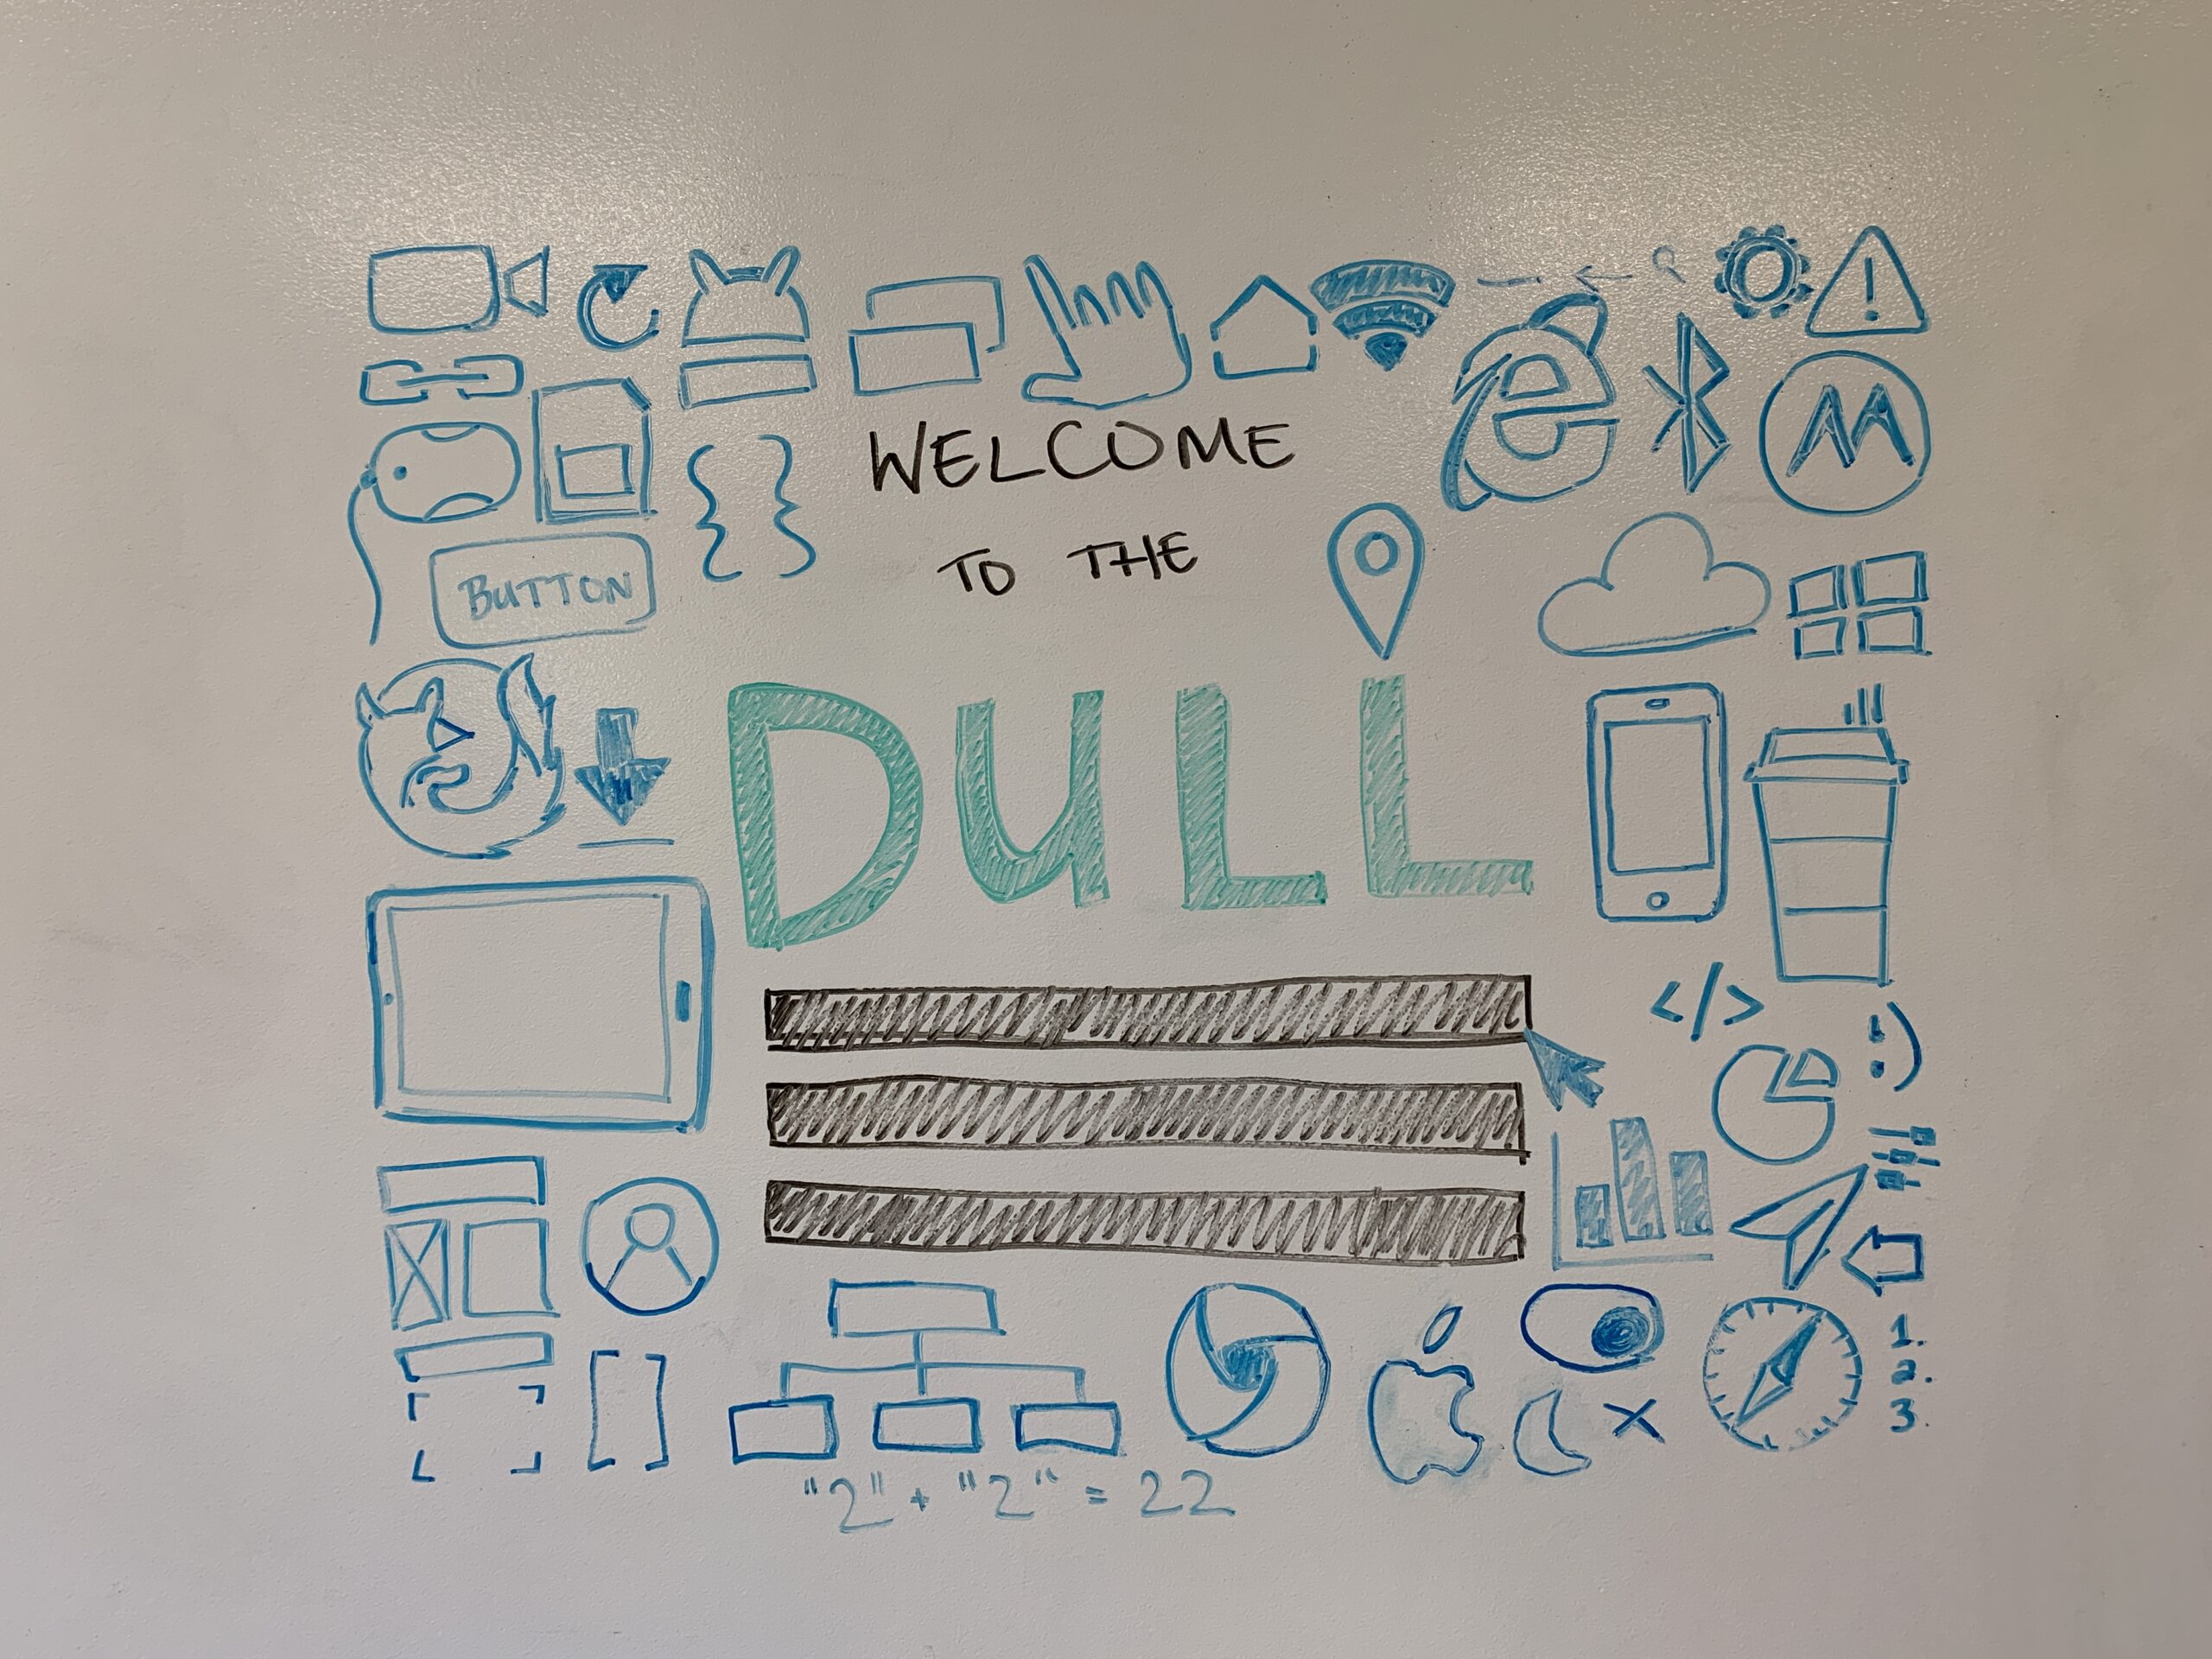 technology icons drawn in blue and black dry erase marker on the lab's whiteboard wall